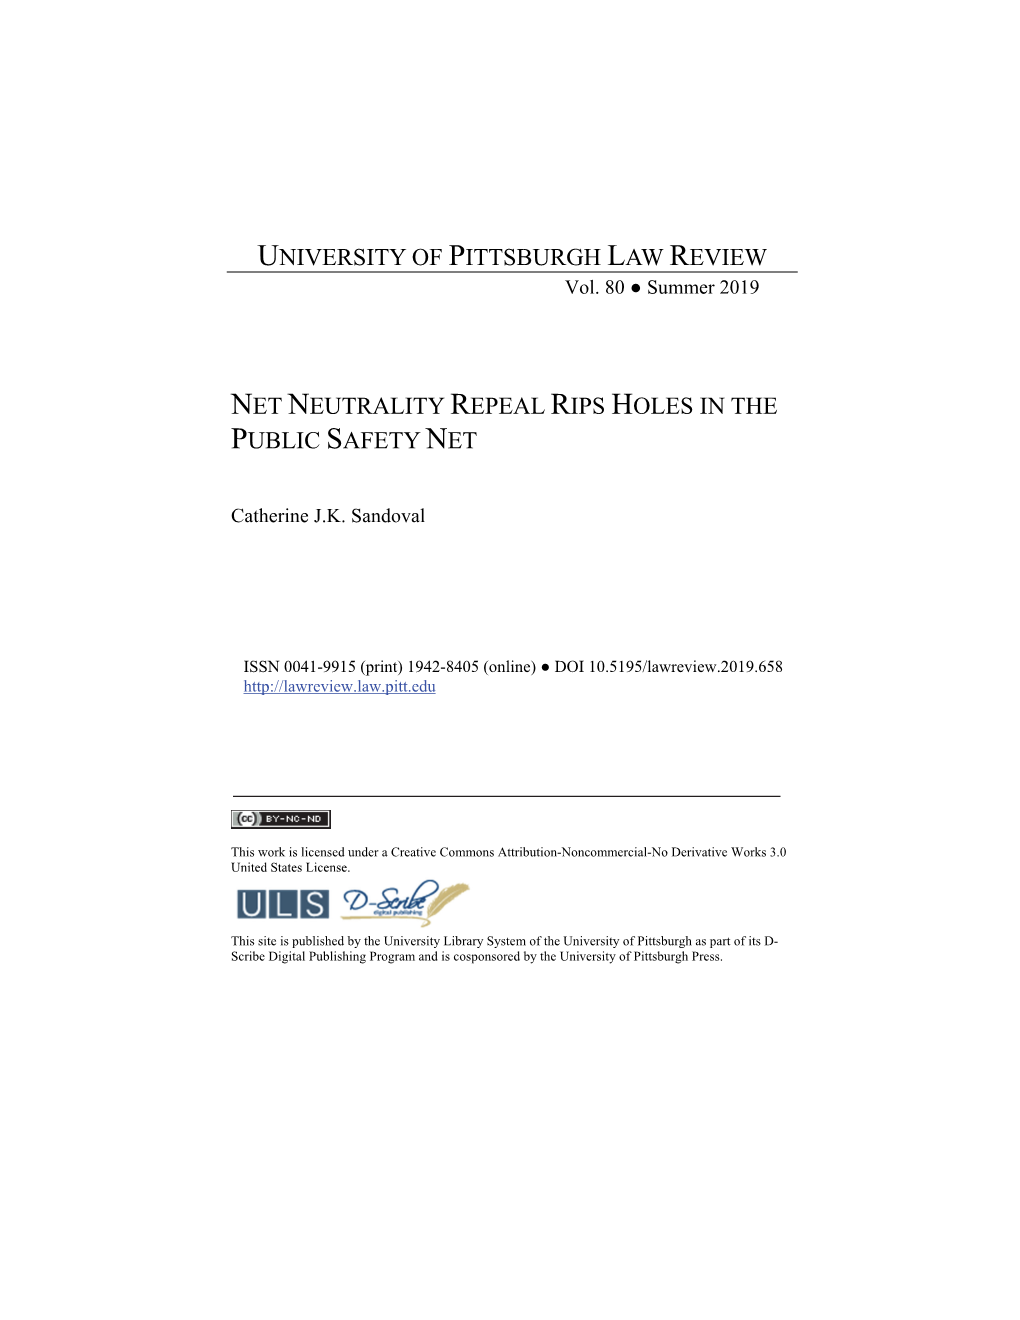 Net Neutrality Repeal Rips Holes in the Public Safety Net University of Pittsburgh Law Review